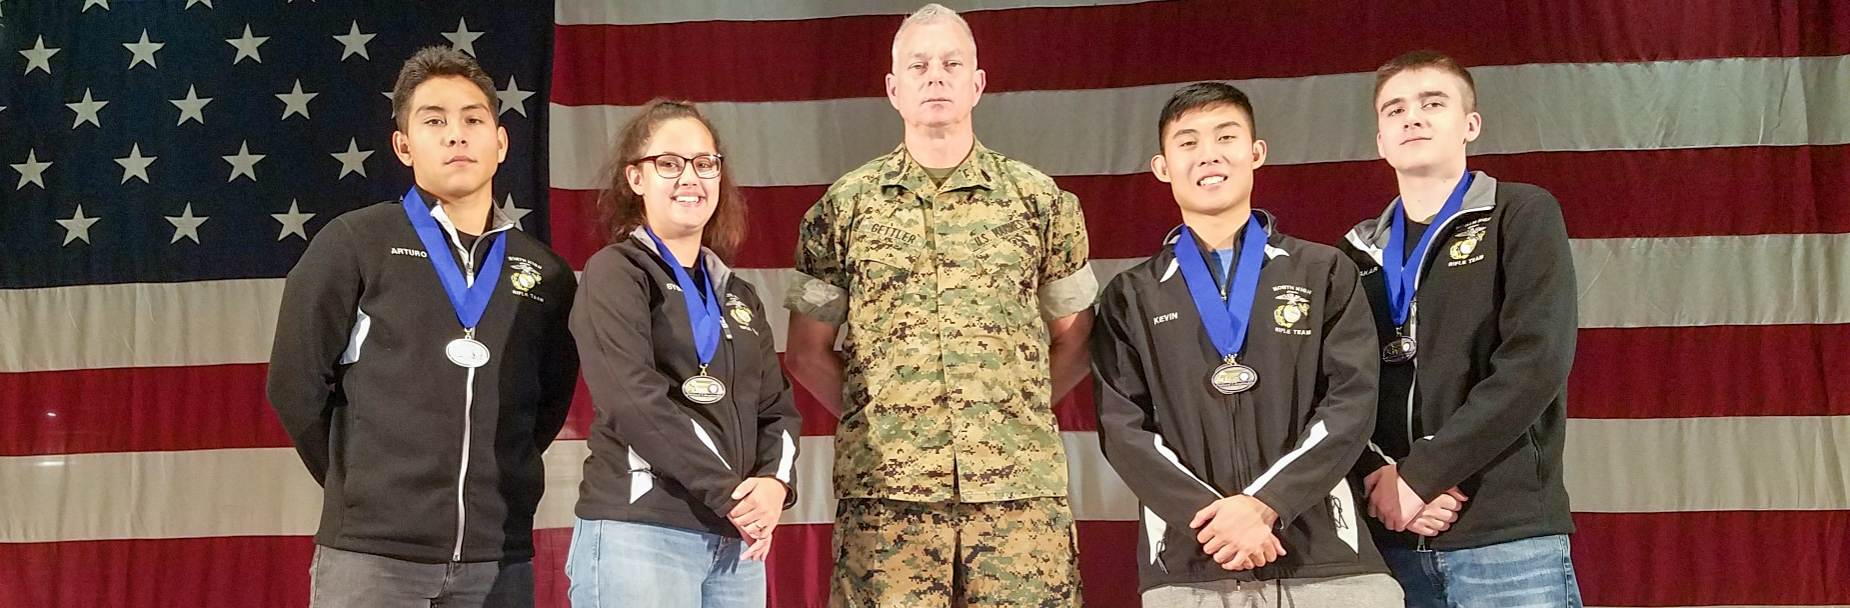 North JROTC Squad on Target at National Competitions